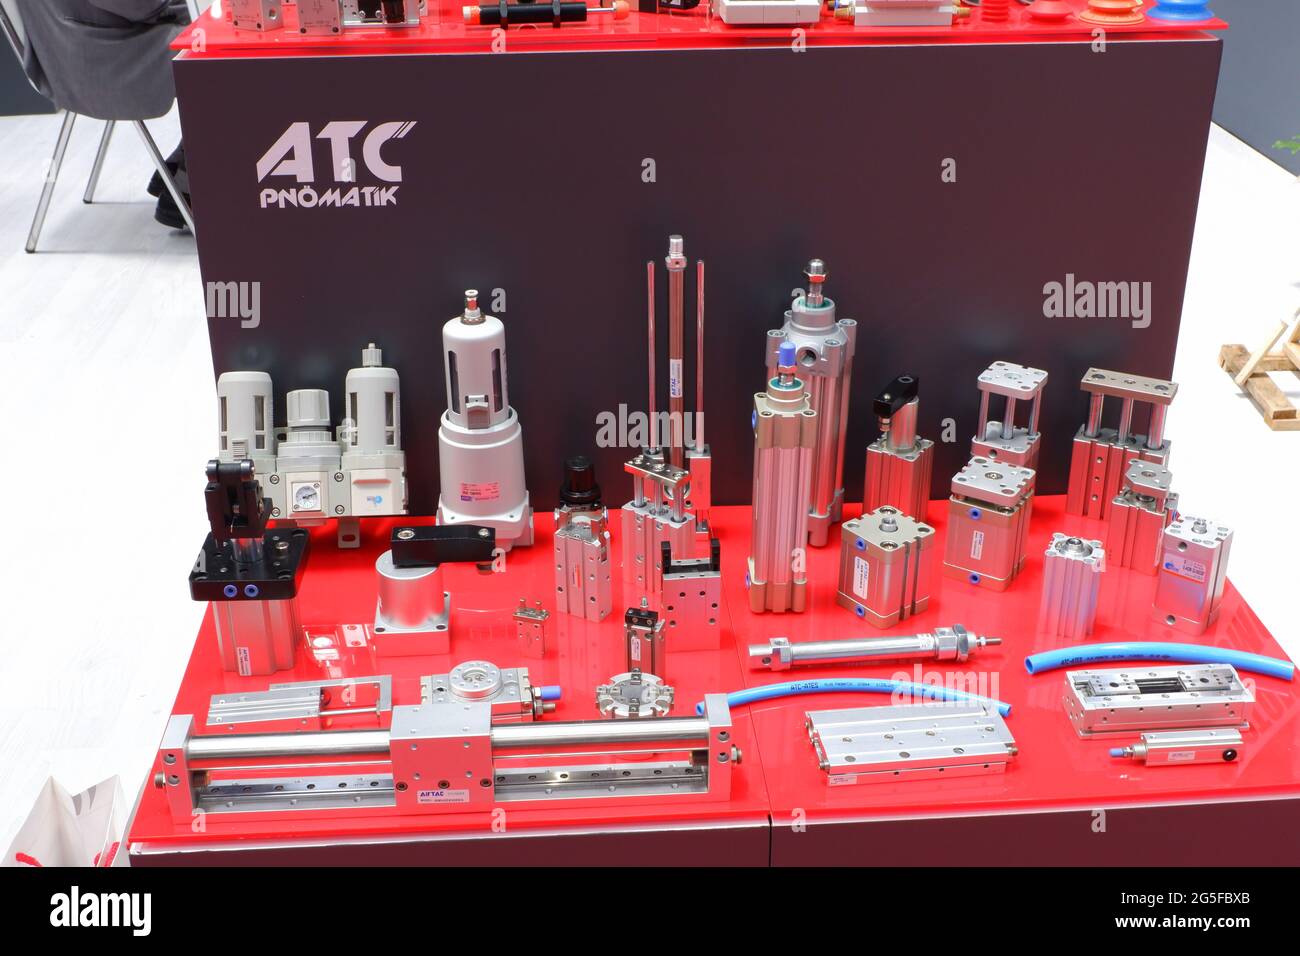 Pneumatic Machine Components at Exhibition Stock Photo